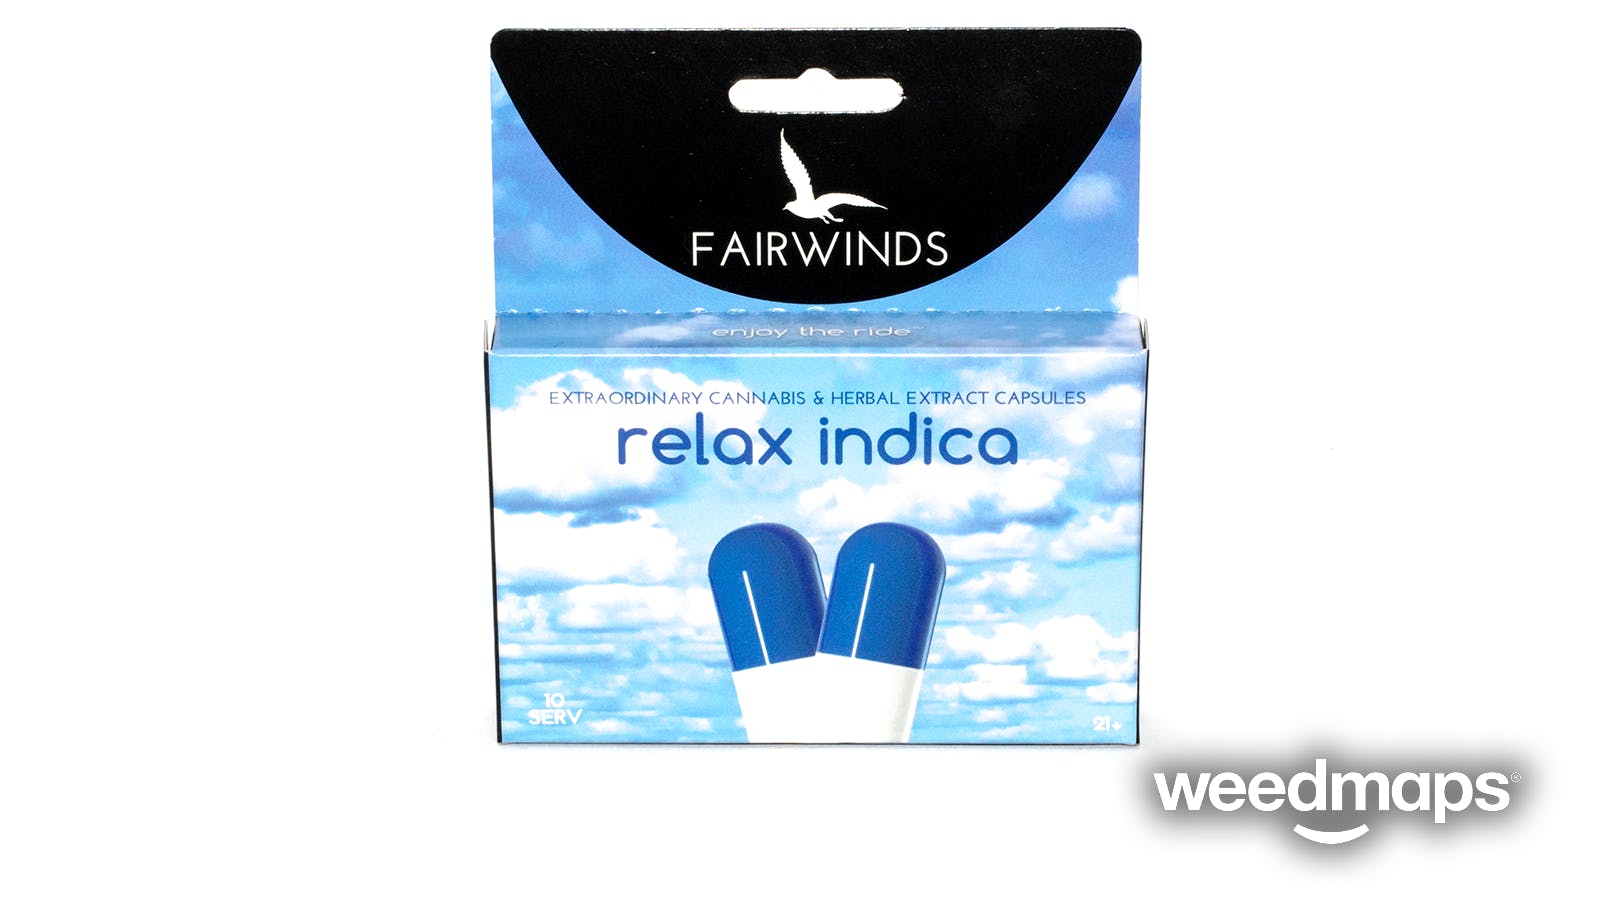 edible-fw-relax-indica-medical-only-250mg-thc